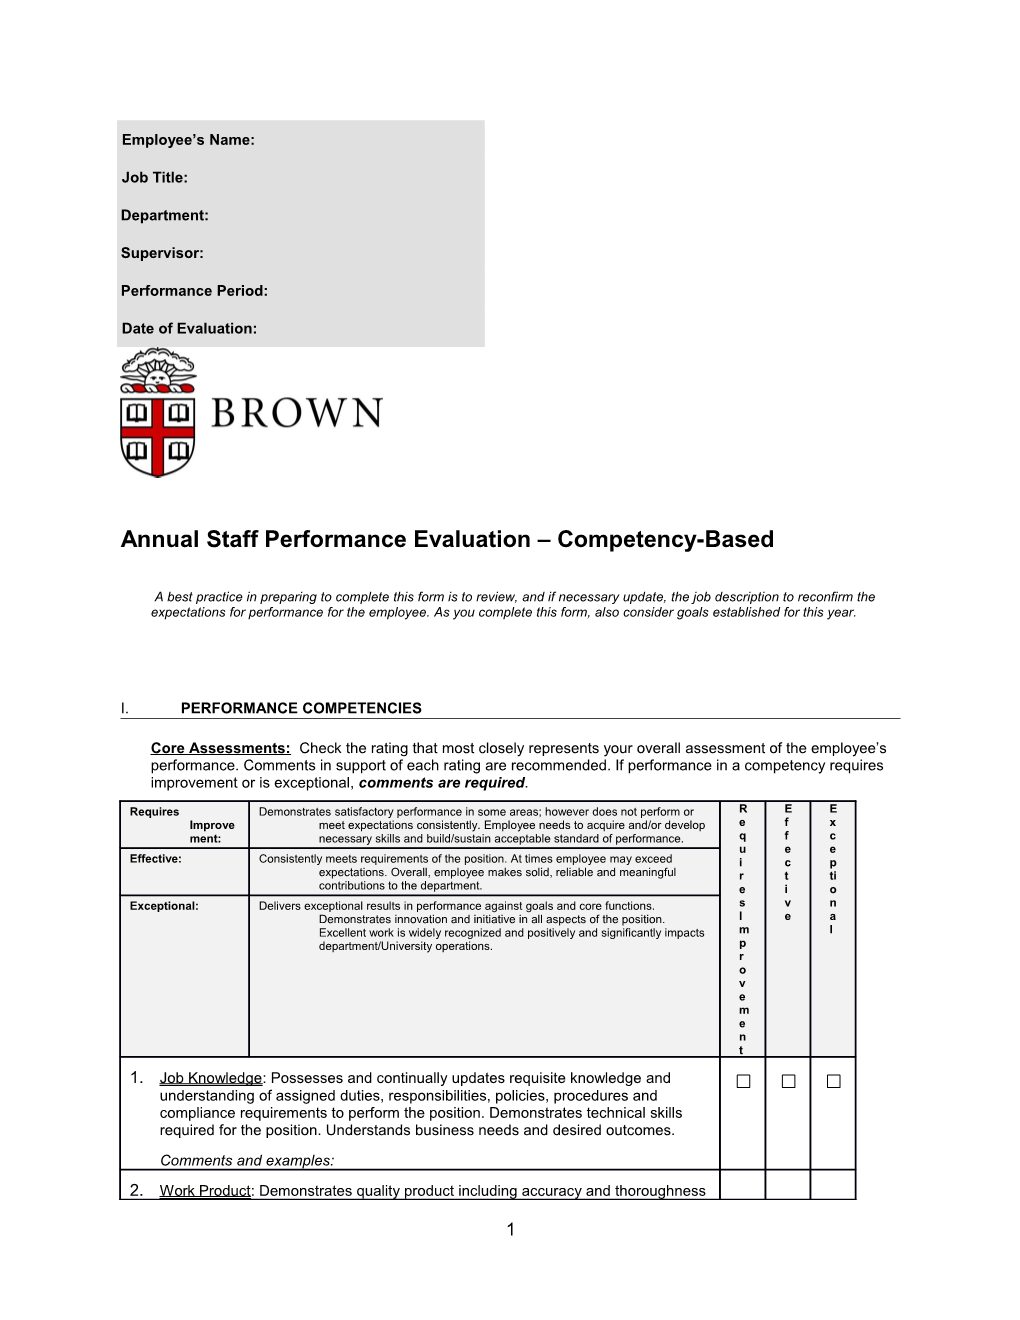 Annual Staff Performance Evaluation Competency-Based